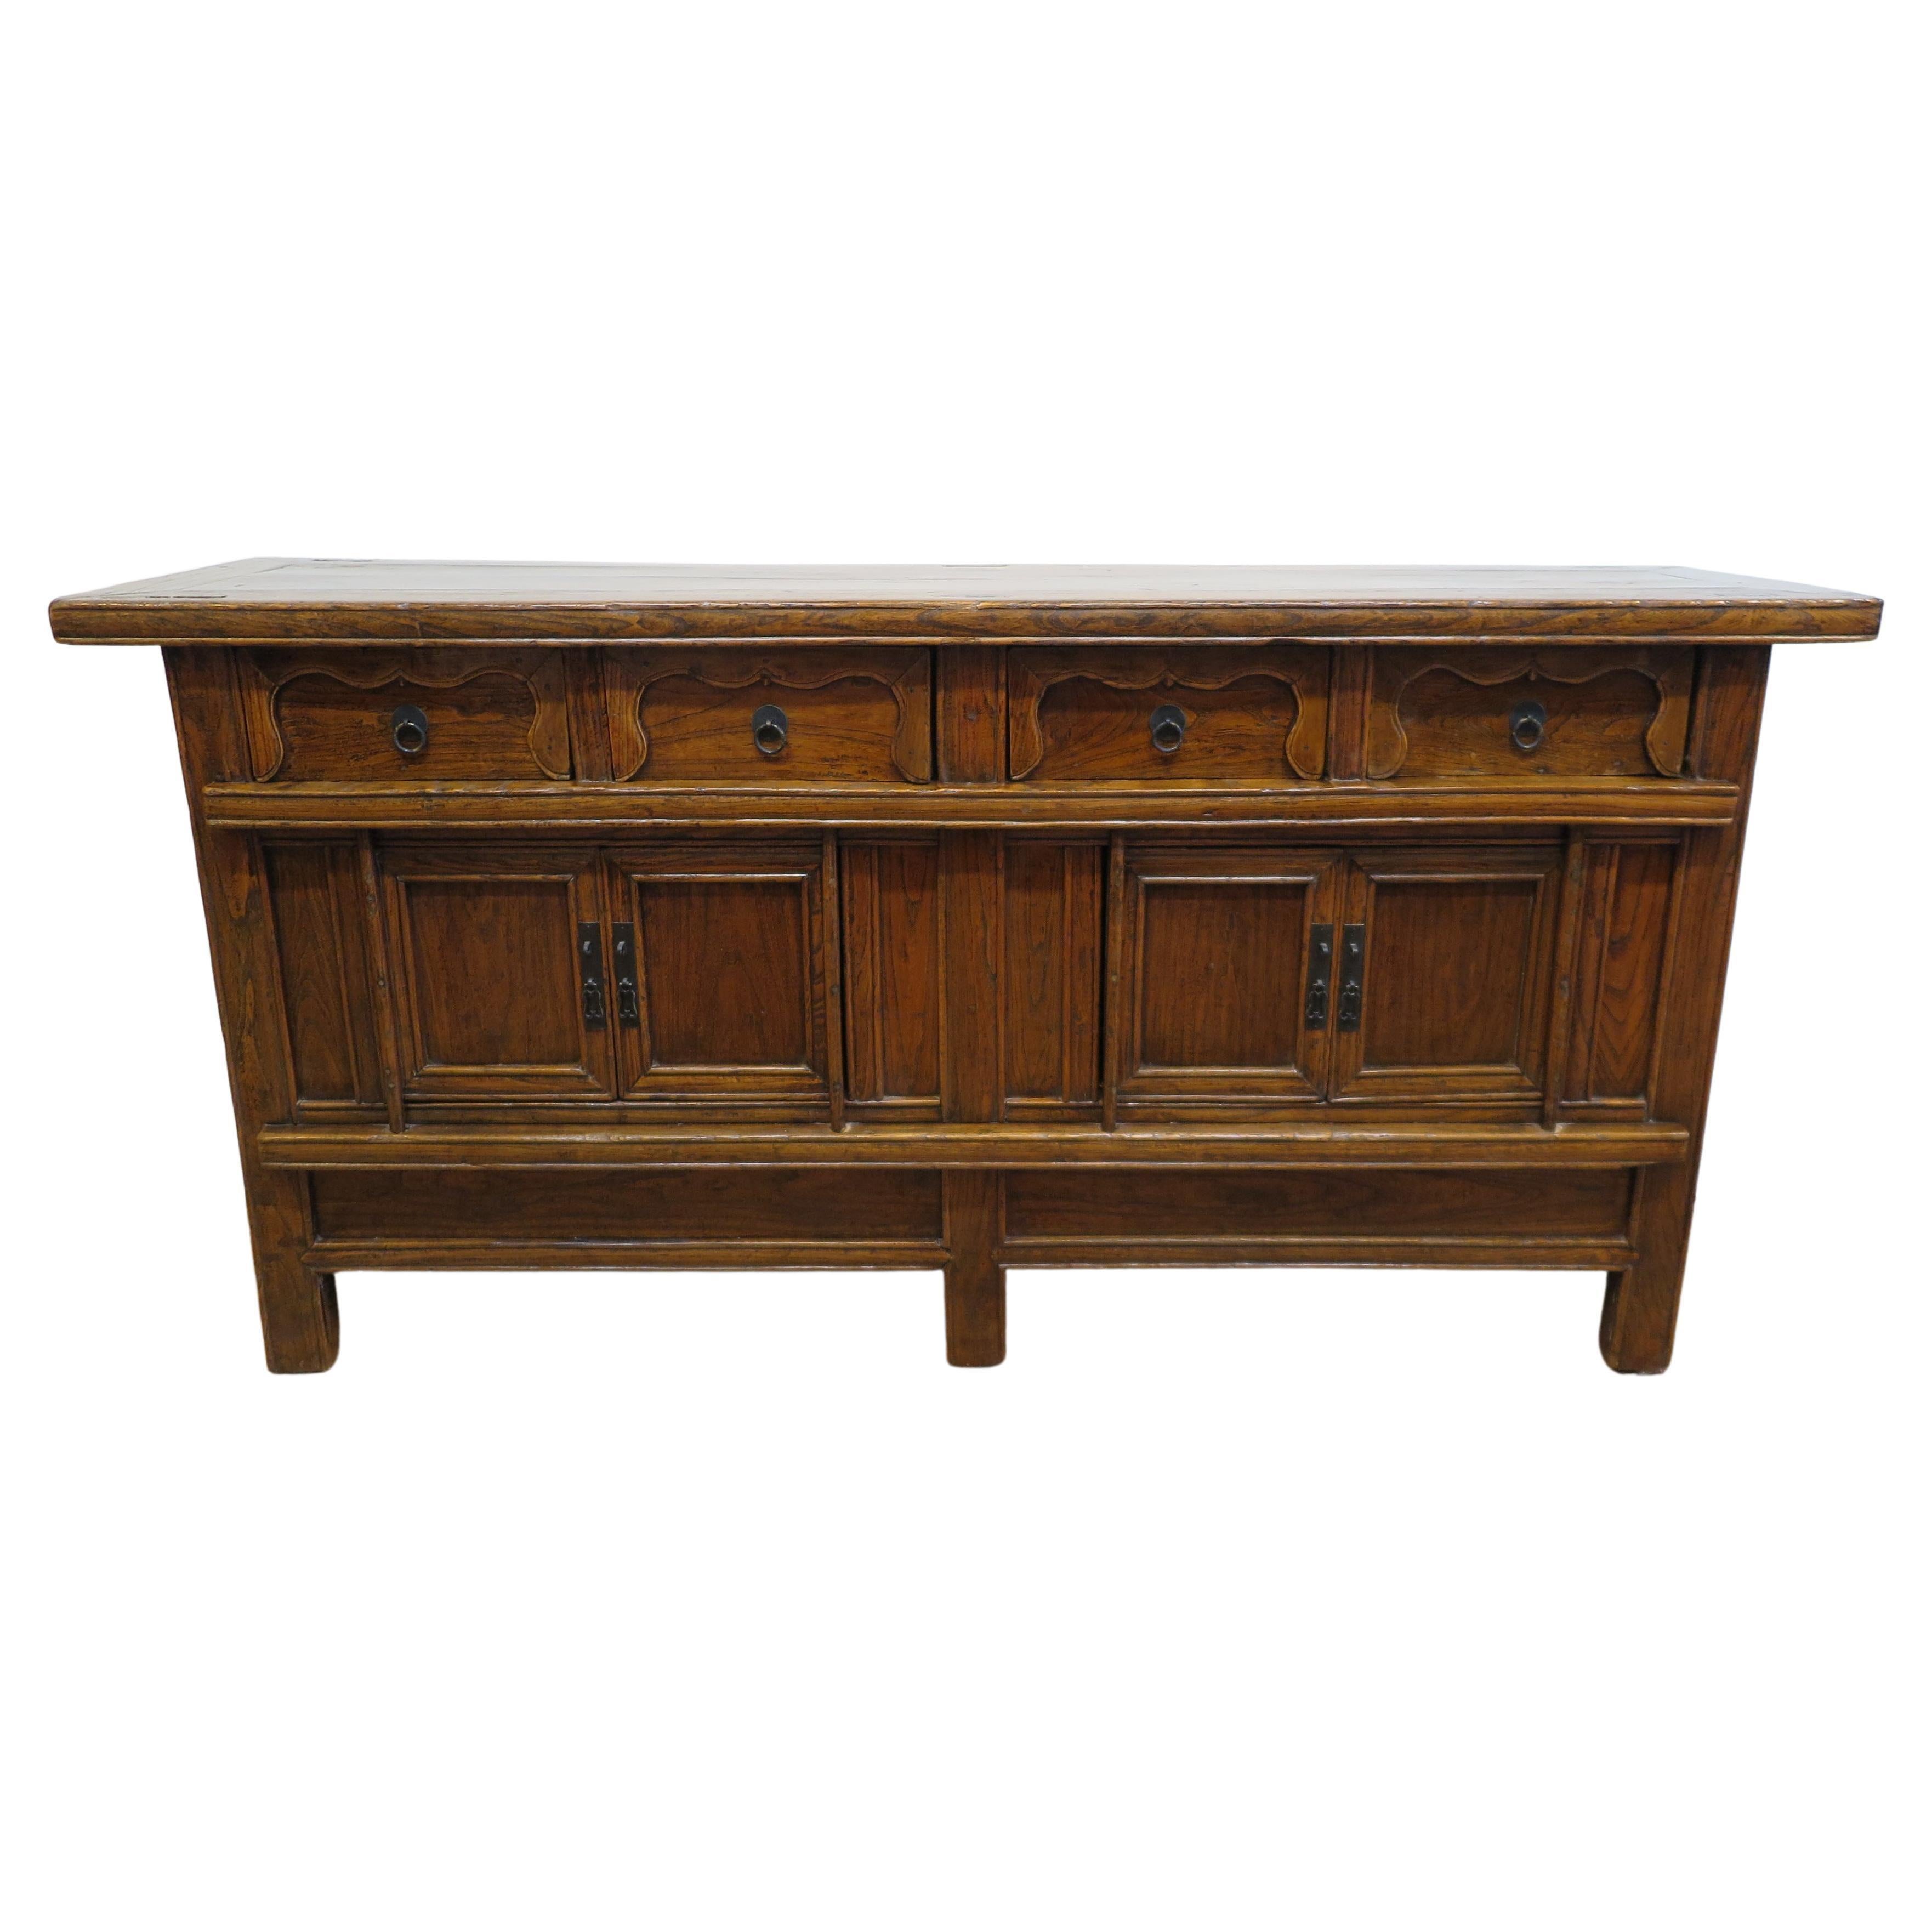 19th Century Provincial Sideboard.  Spectacular Country Sideboard, antique Chinese Sideboard from the countryside of Shanxi province.  The old growth Elm wood has a flowing grain prevalent with warm brown tones bringing the beauty and depth of the